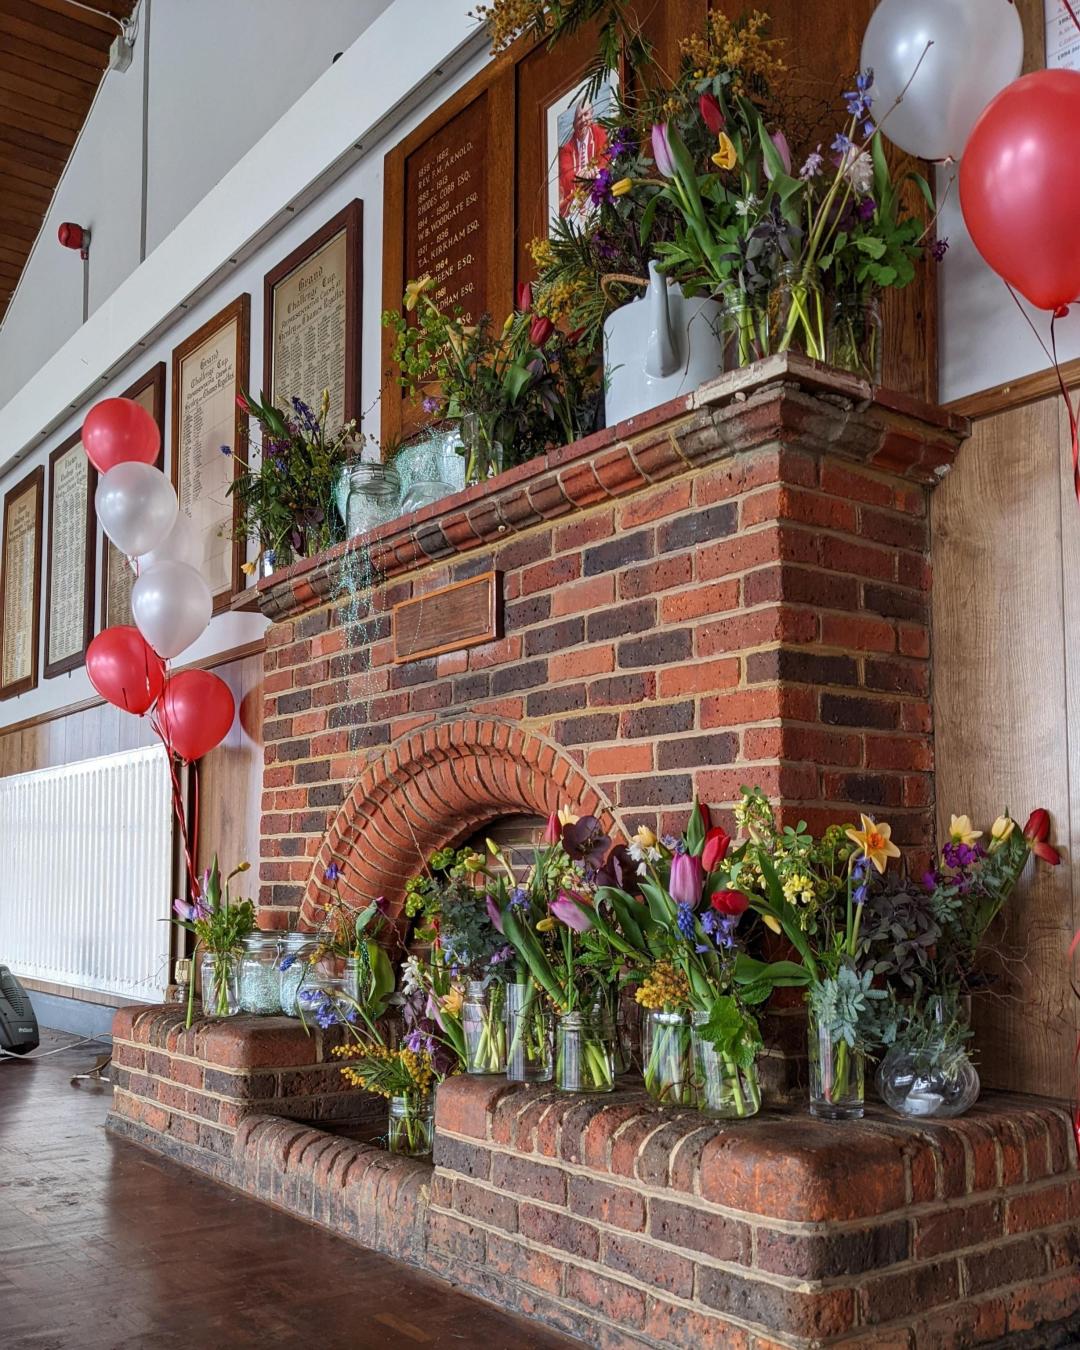 A brick fireplace covered in balloons and flowers